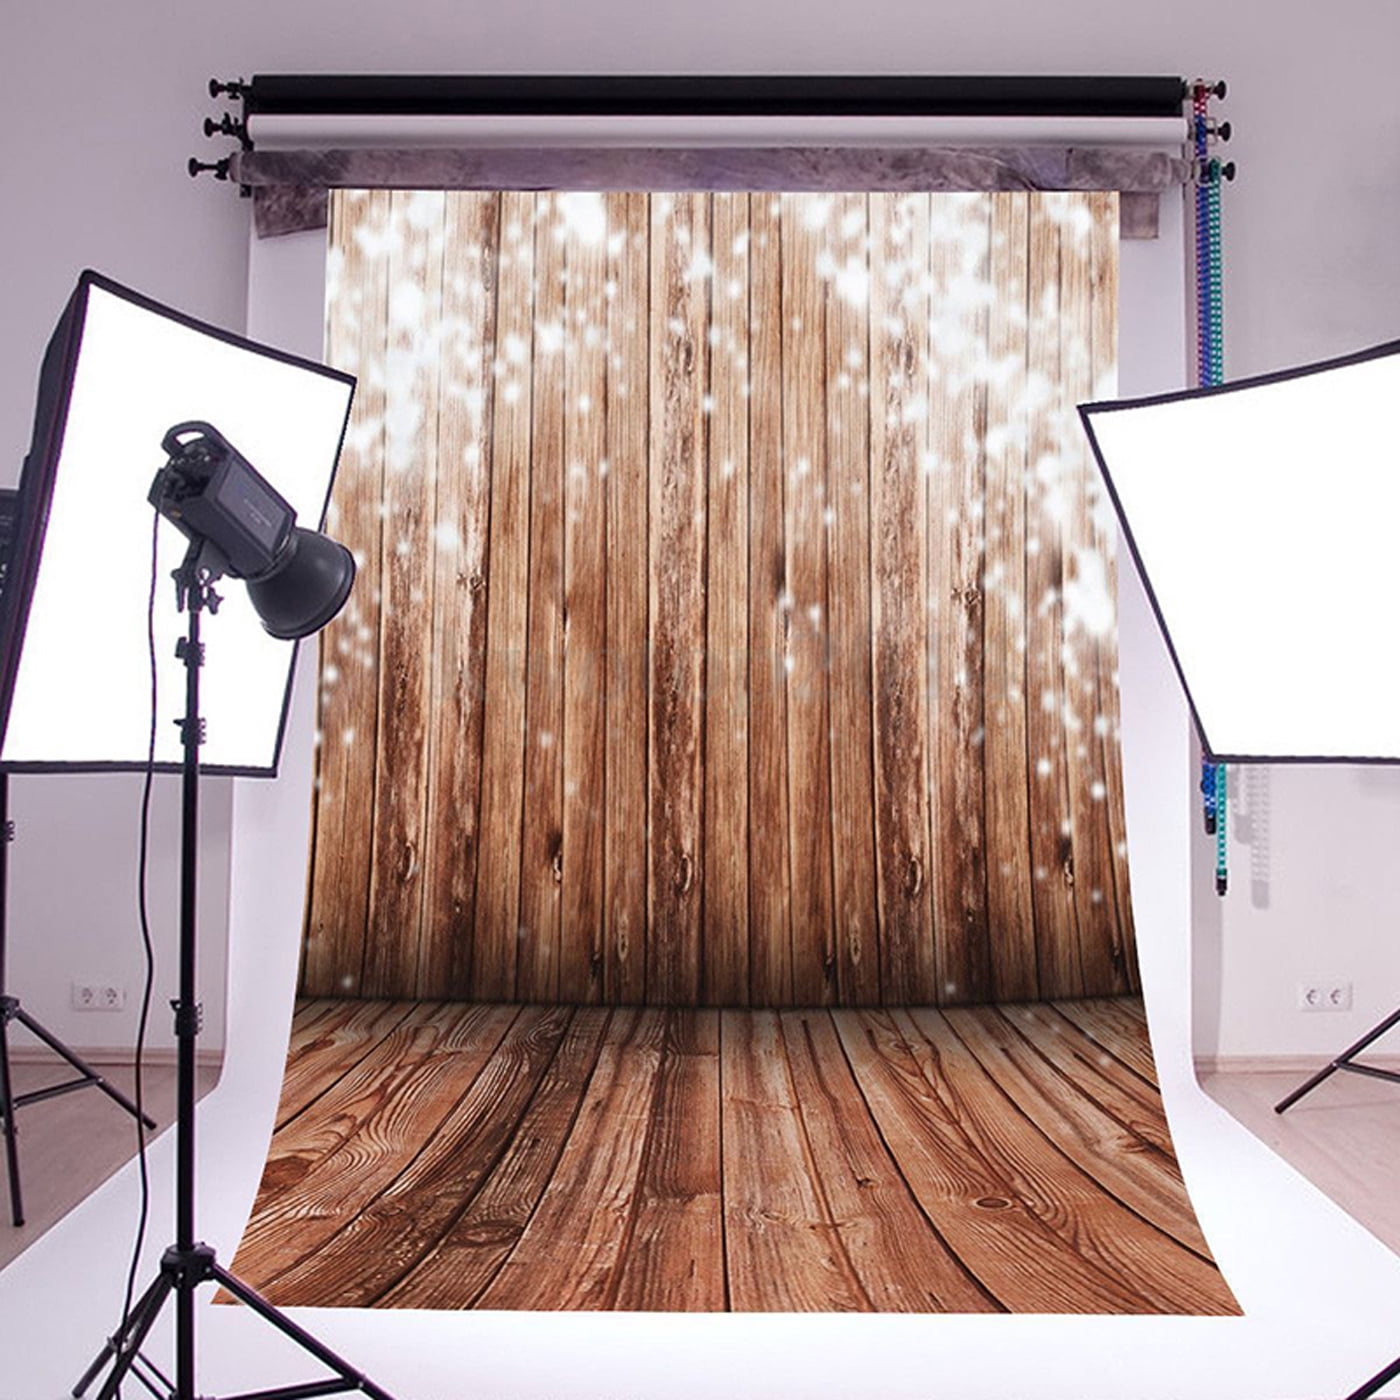 LB 8x8ft Vinyl Vintage Brick Wall Photo Backdrop Rustic Wood Floor Backdrop for Photoshoot Wedding Birthday Party YouTube Video Portraits Photo Booth Background 